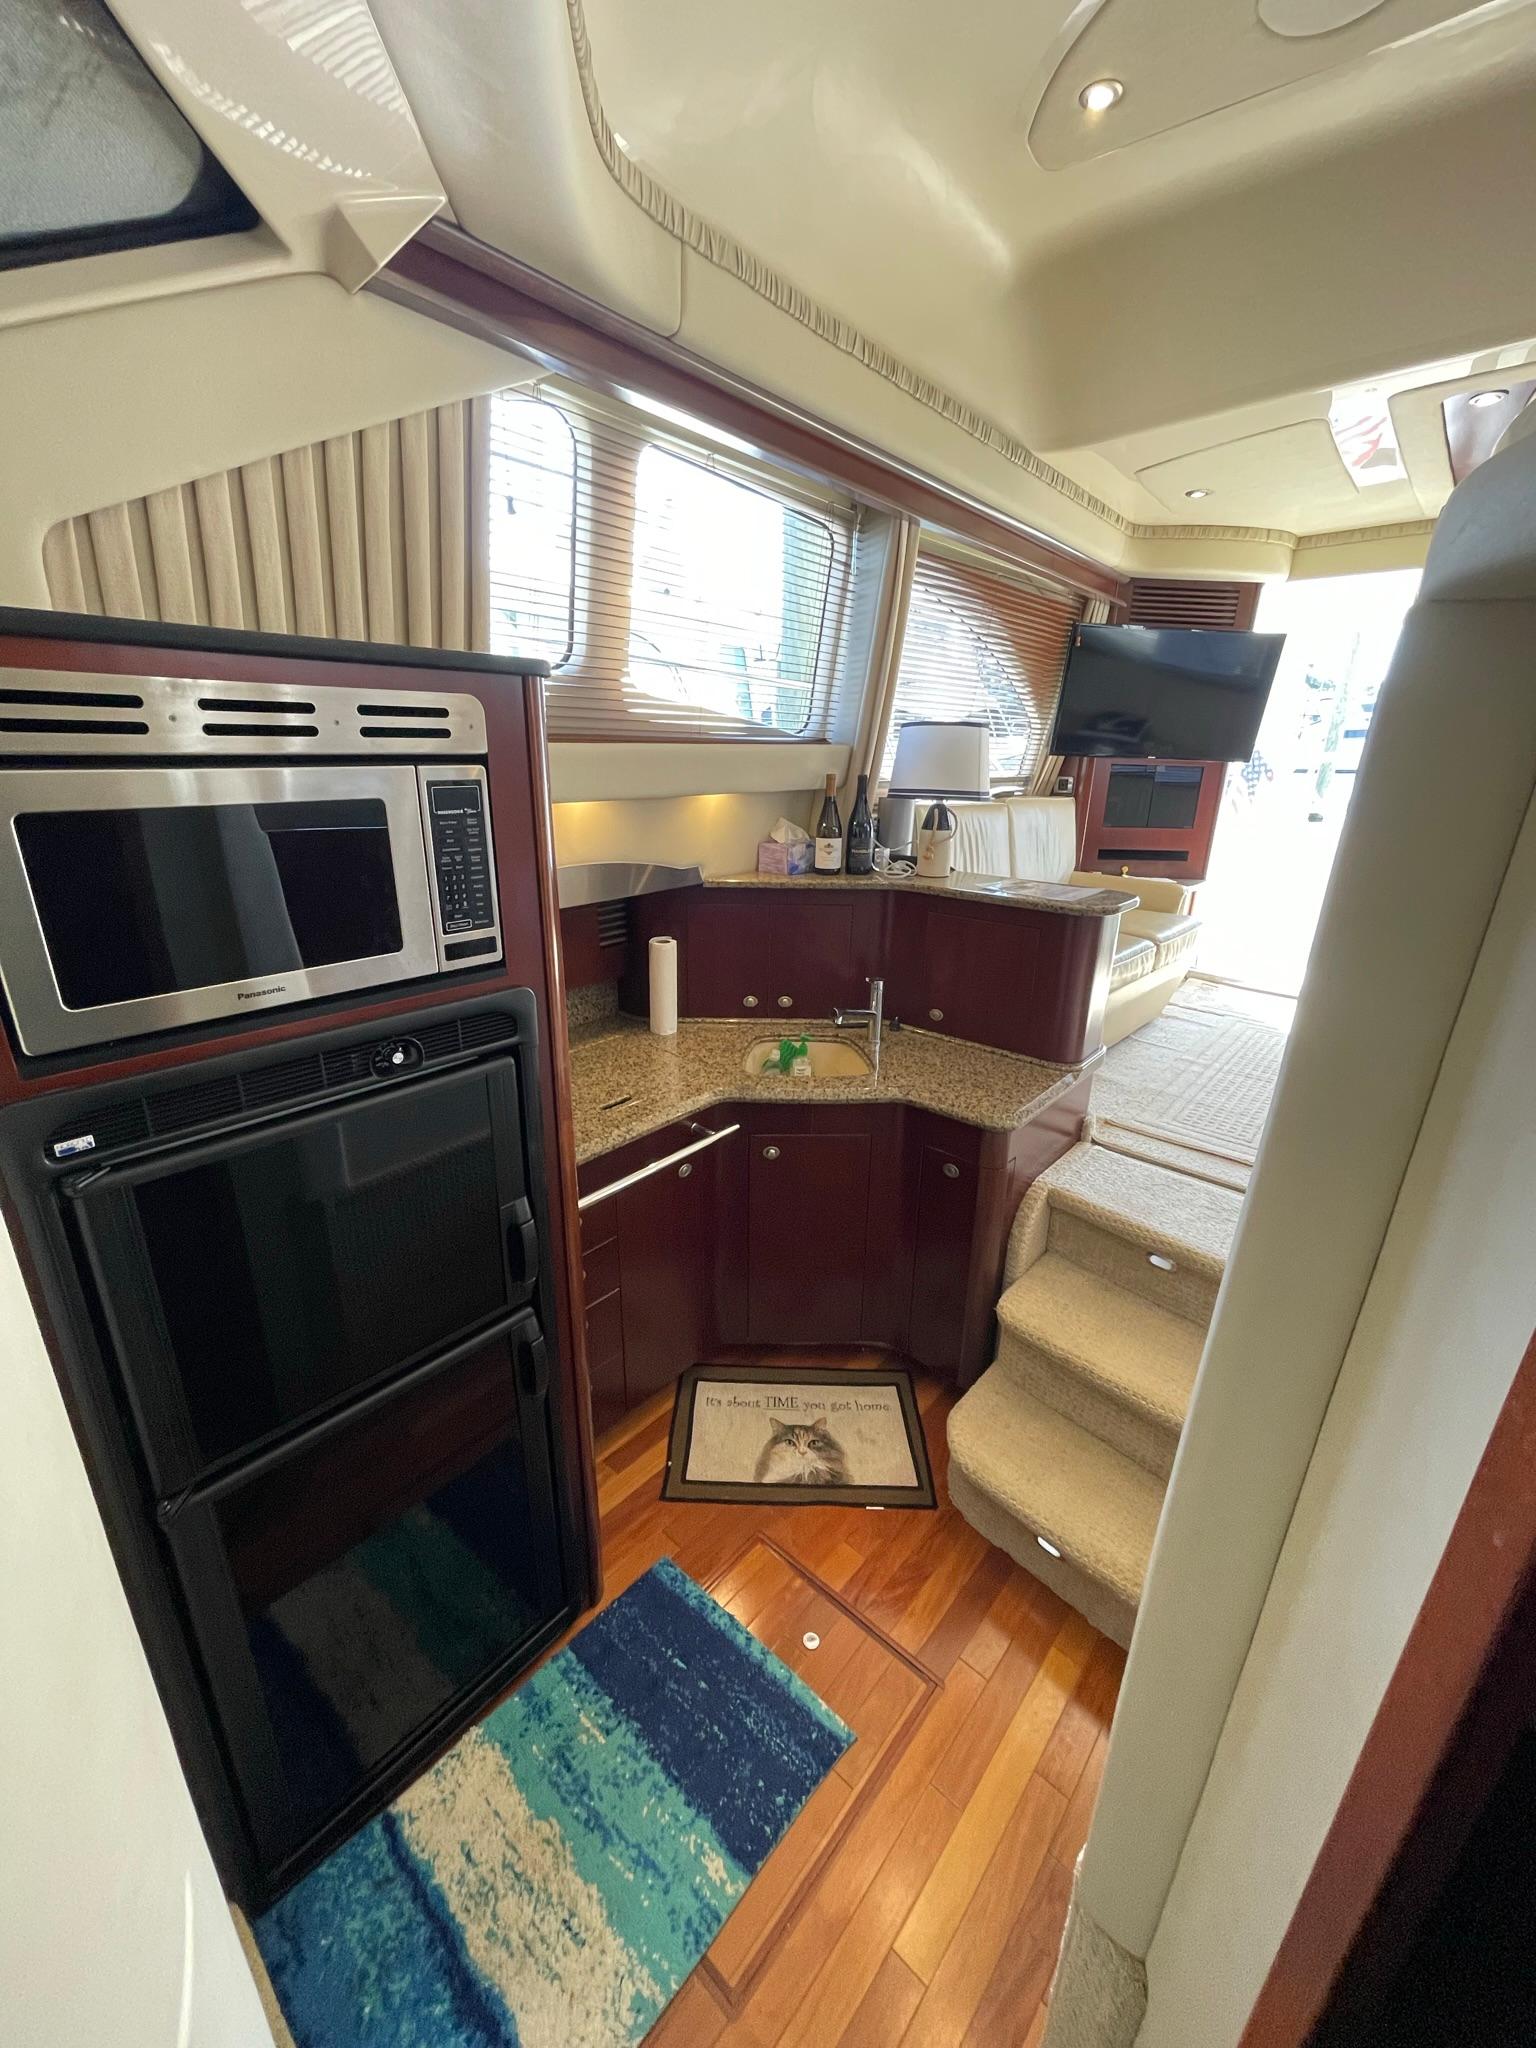 GALLEY LOOKING AFT